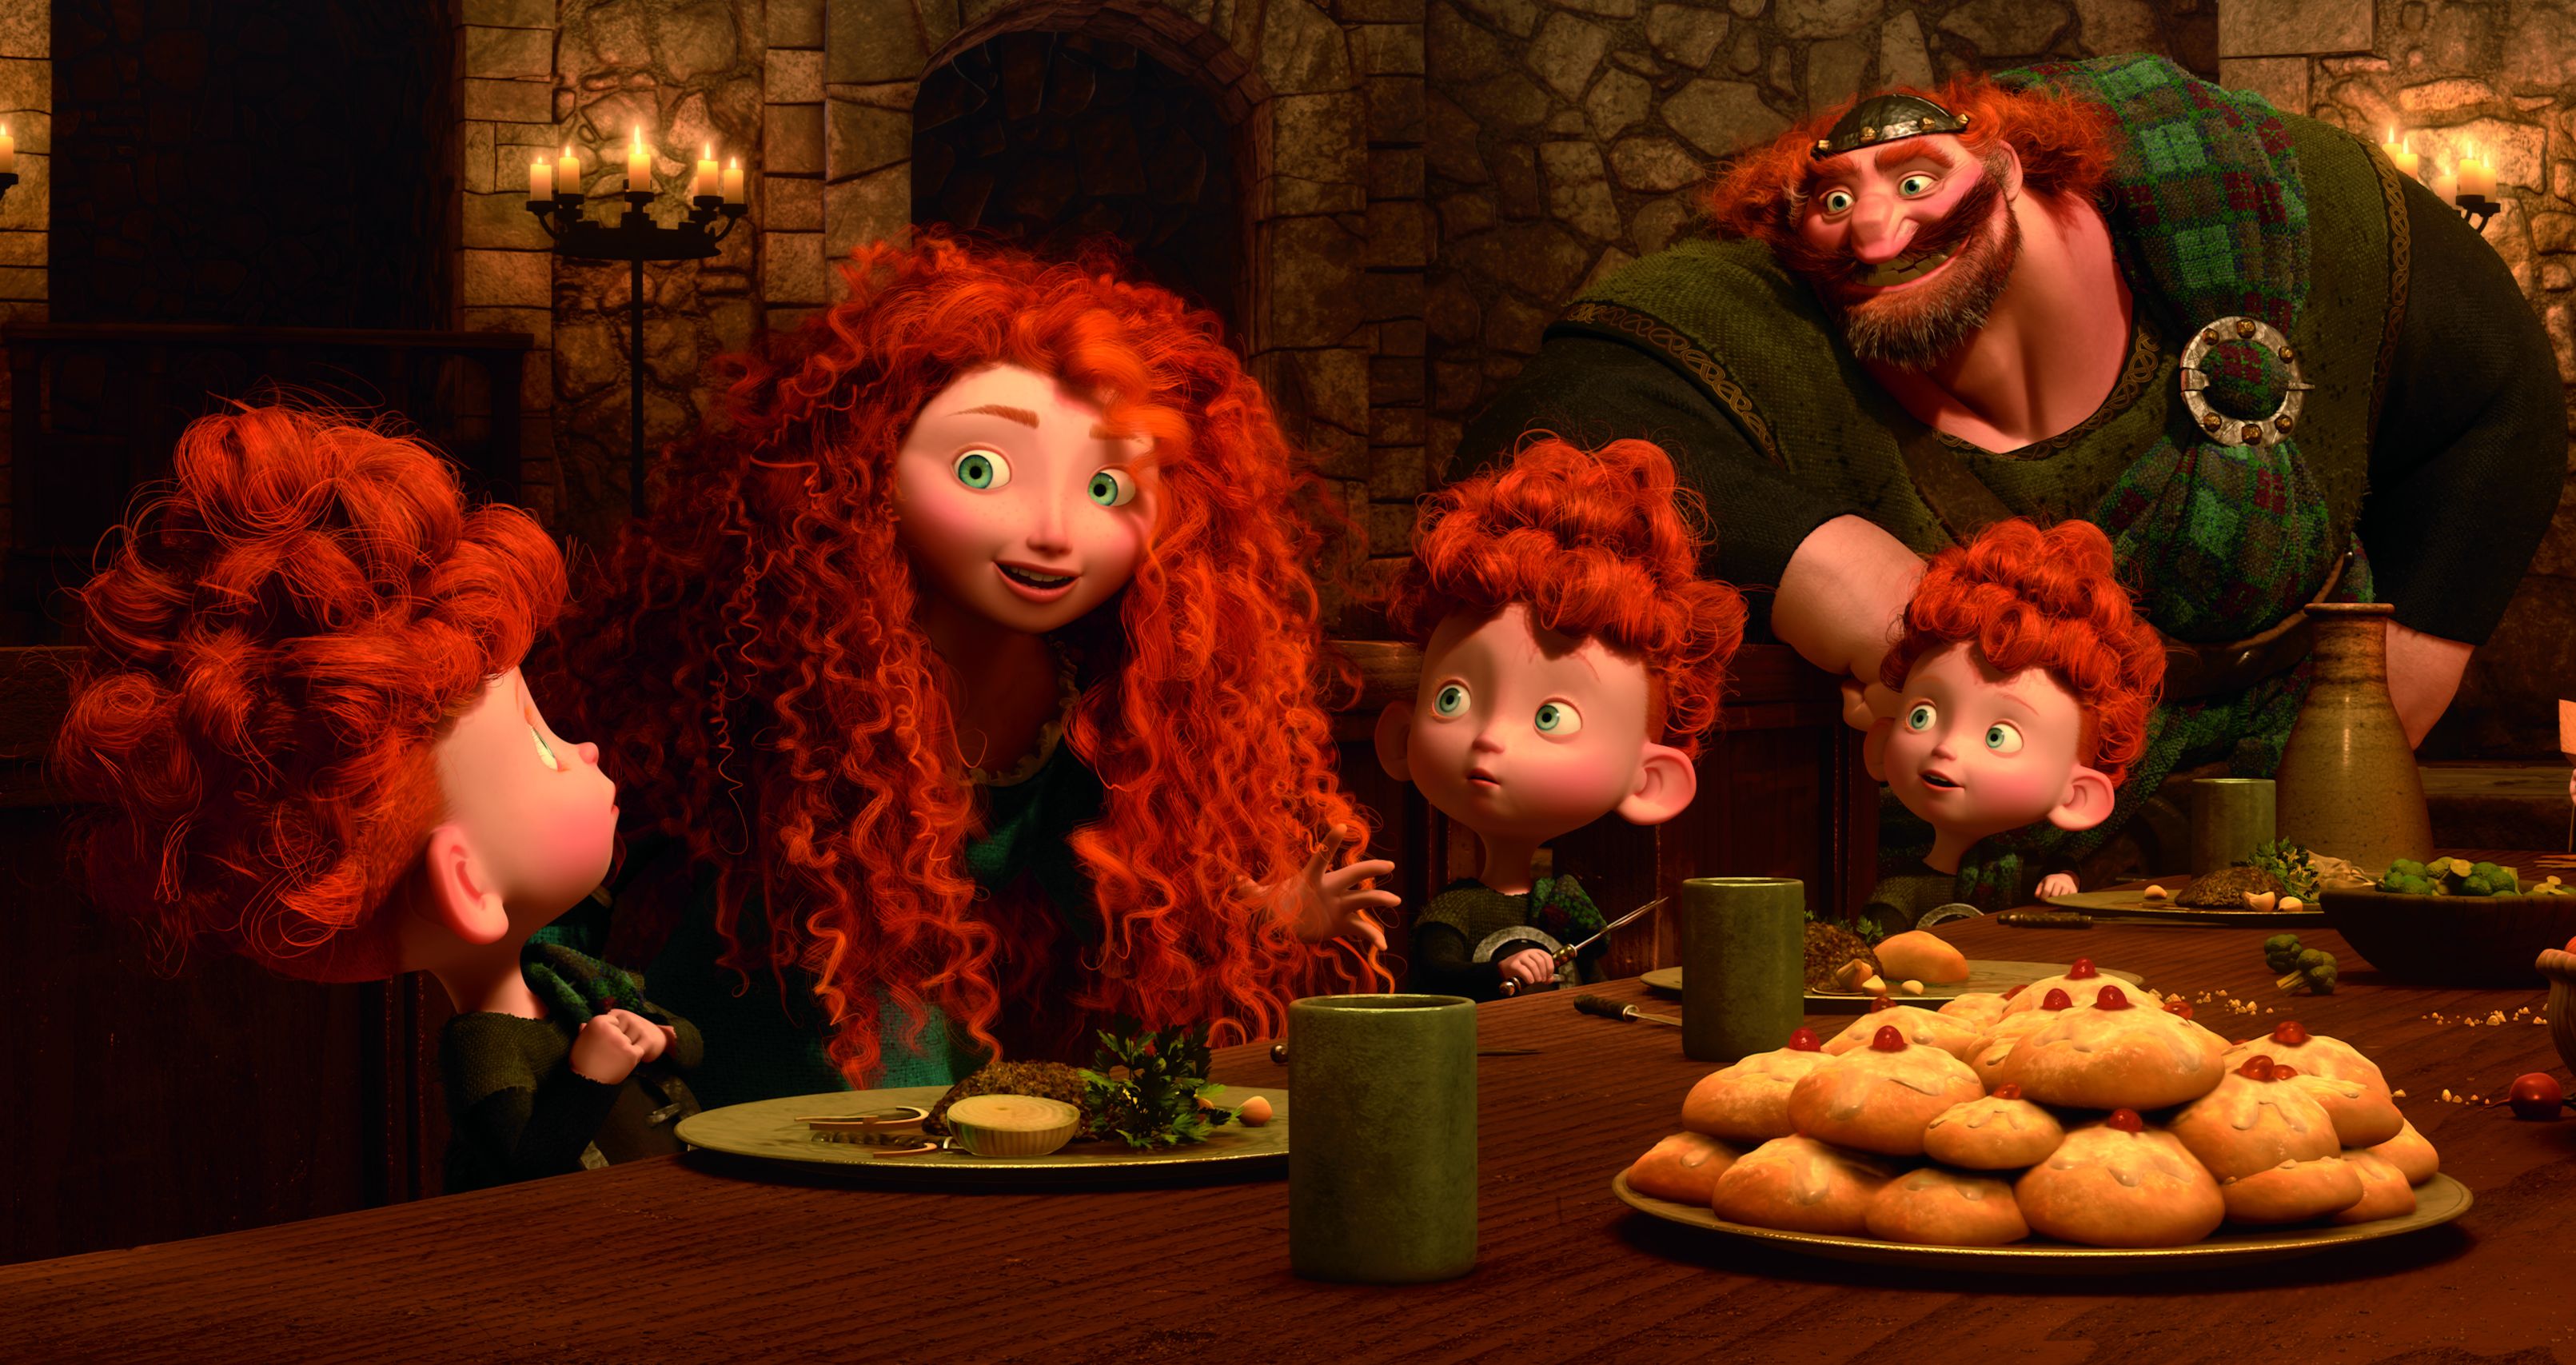 The Triplets at the table in Brave